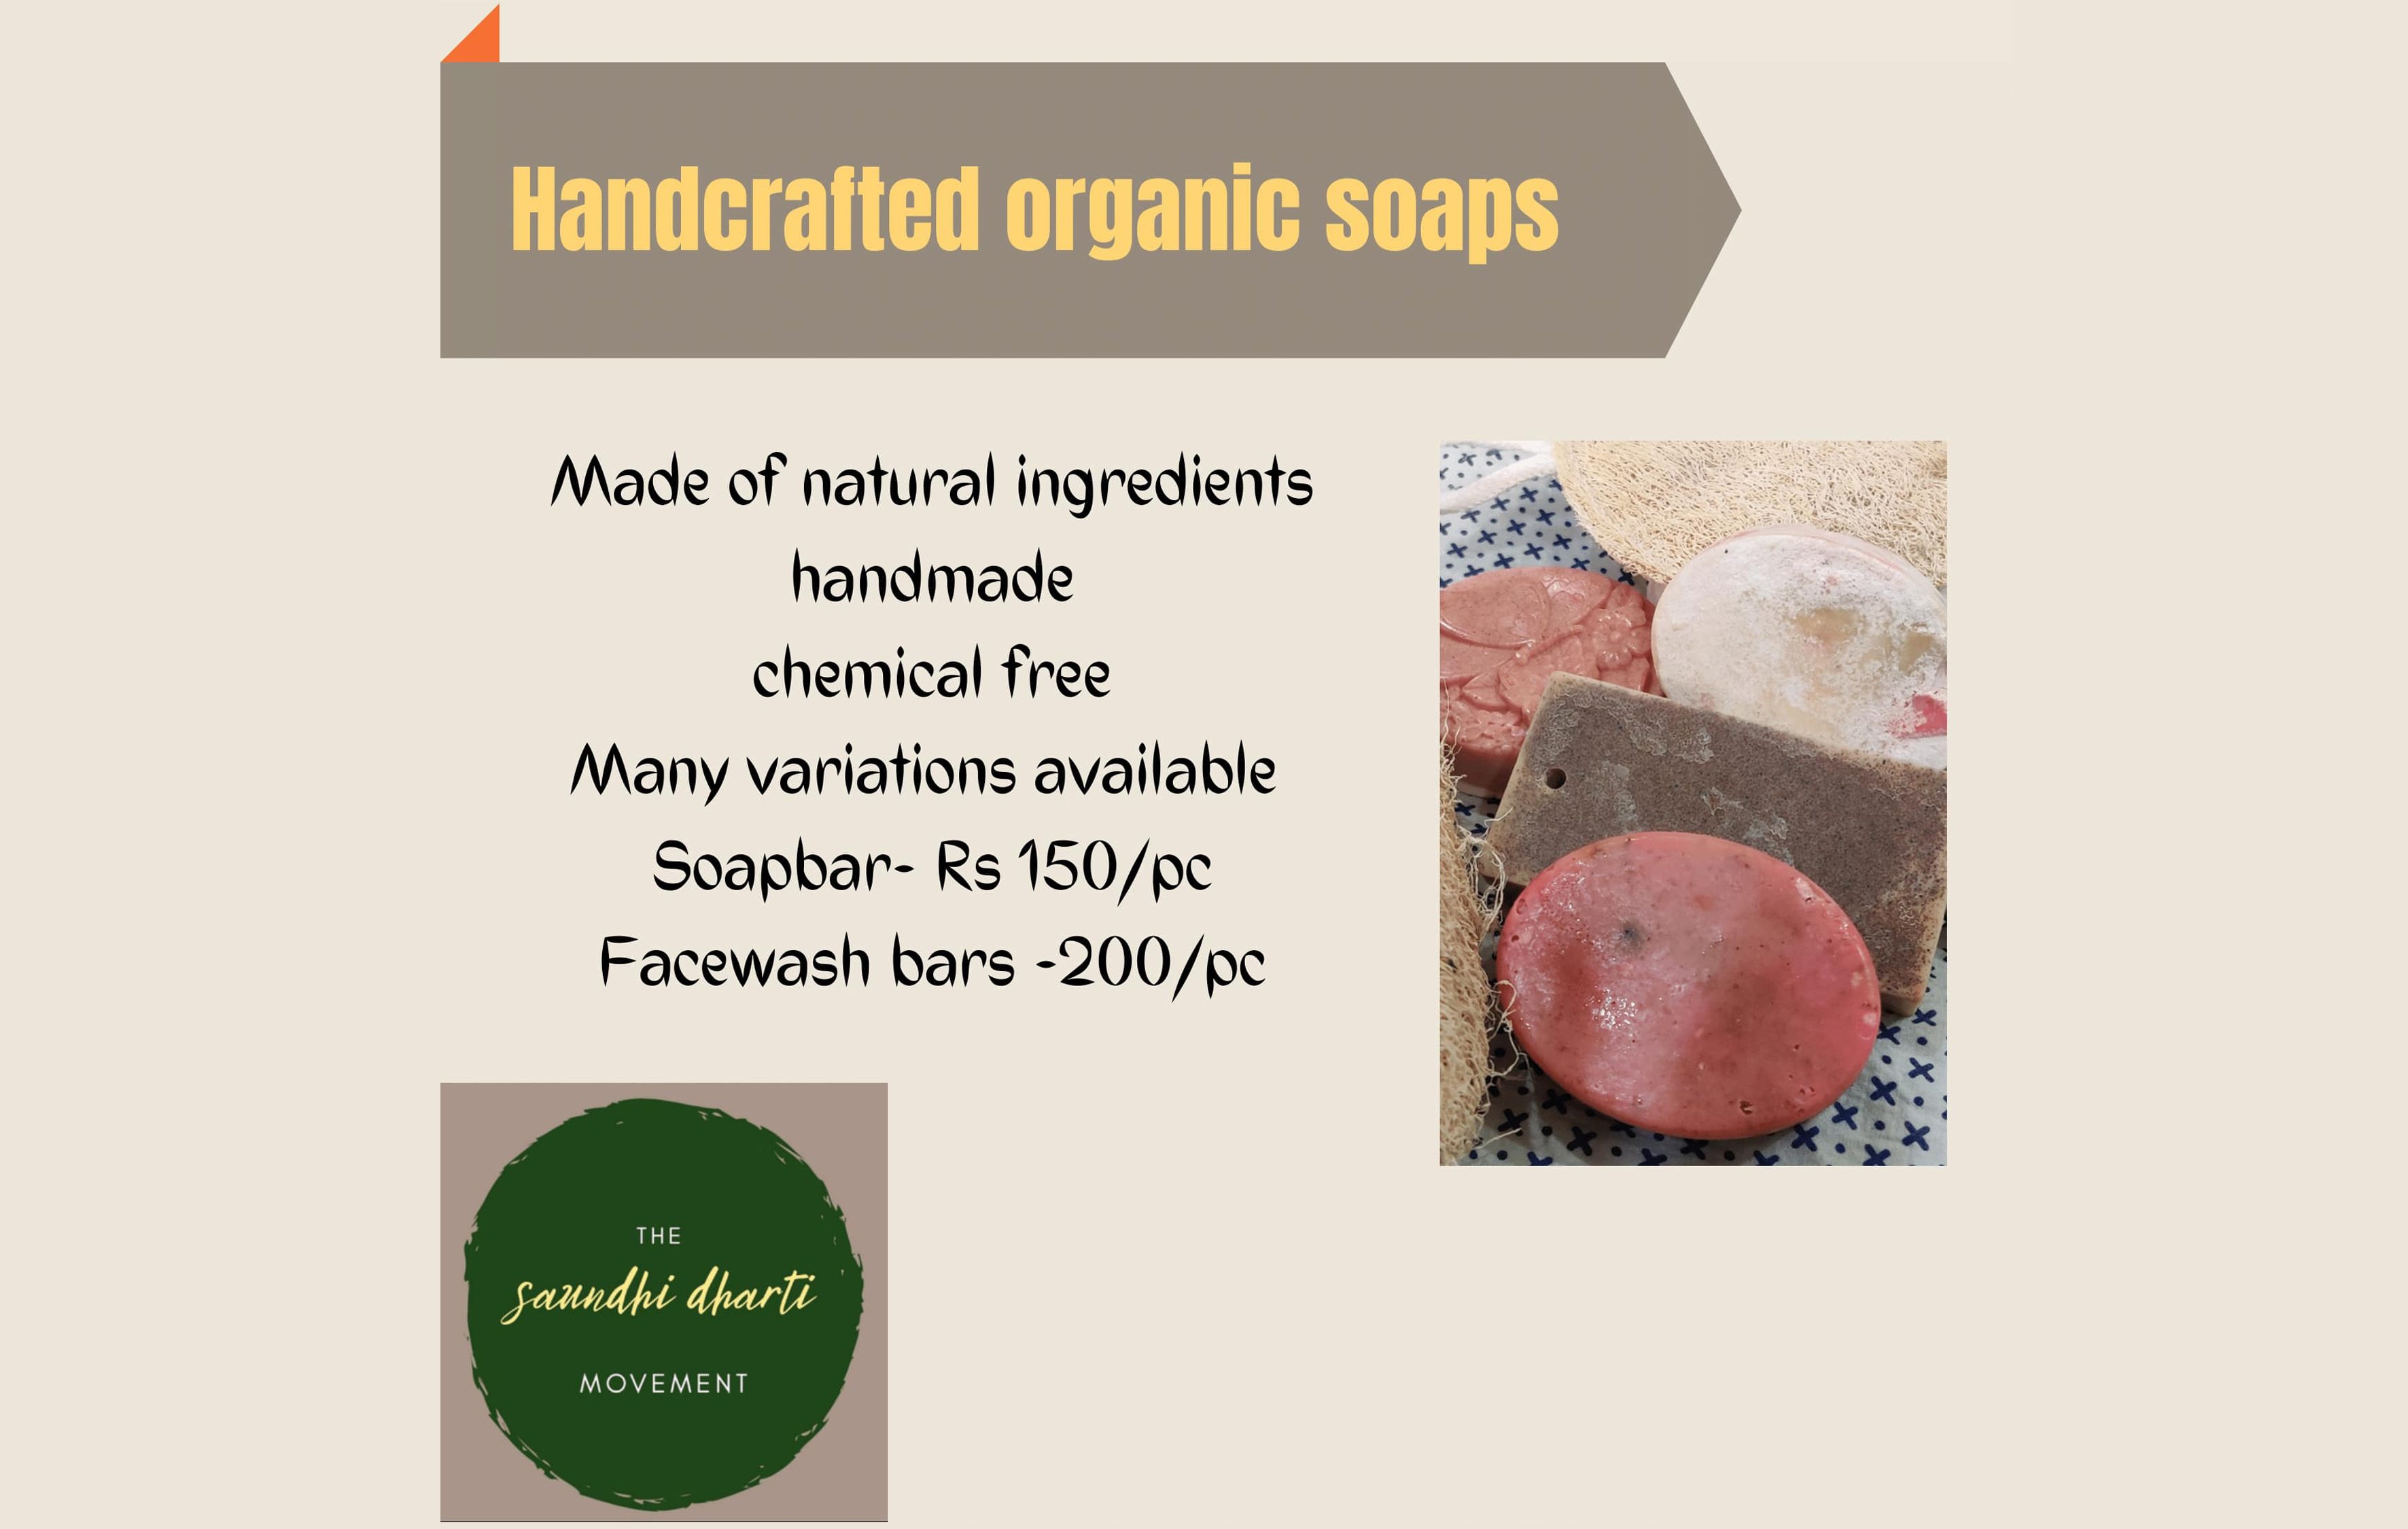 Handcrafted Organic Soaps